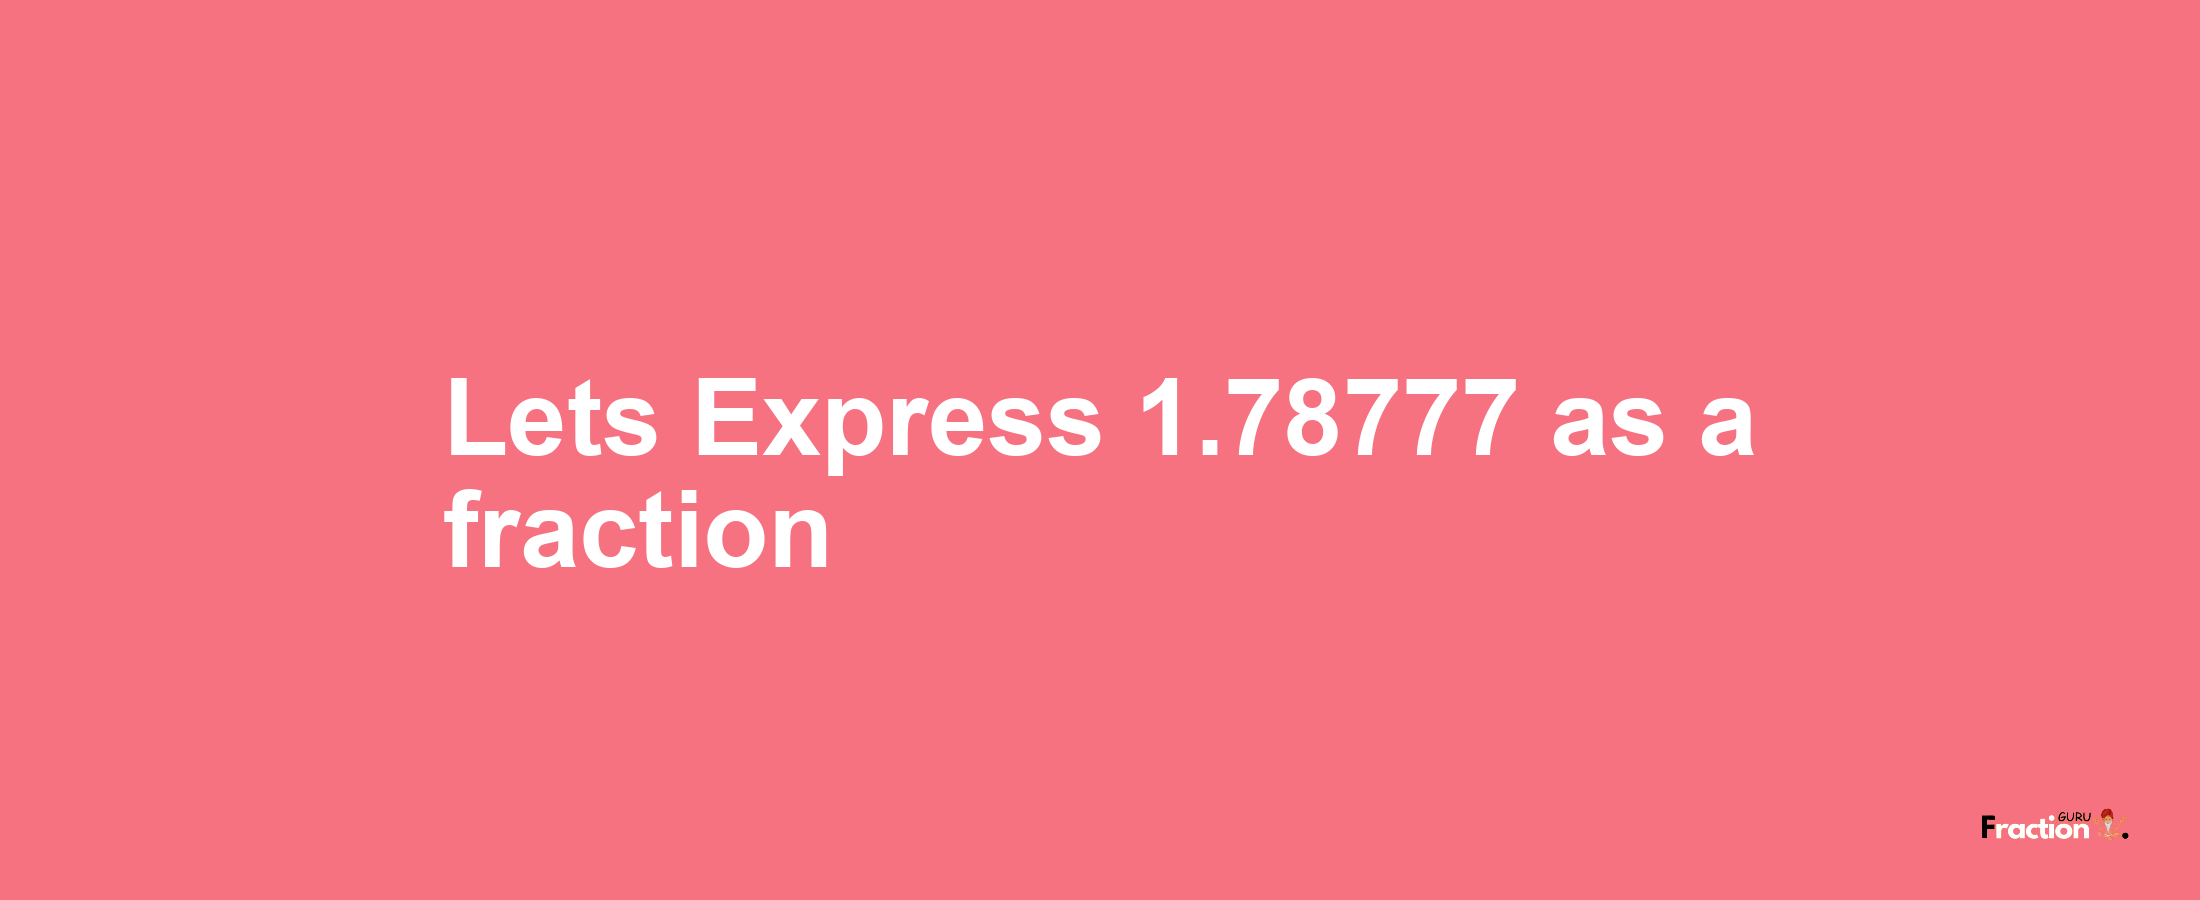 Lets Express 1.78777 as afraction